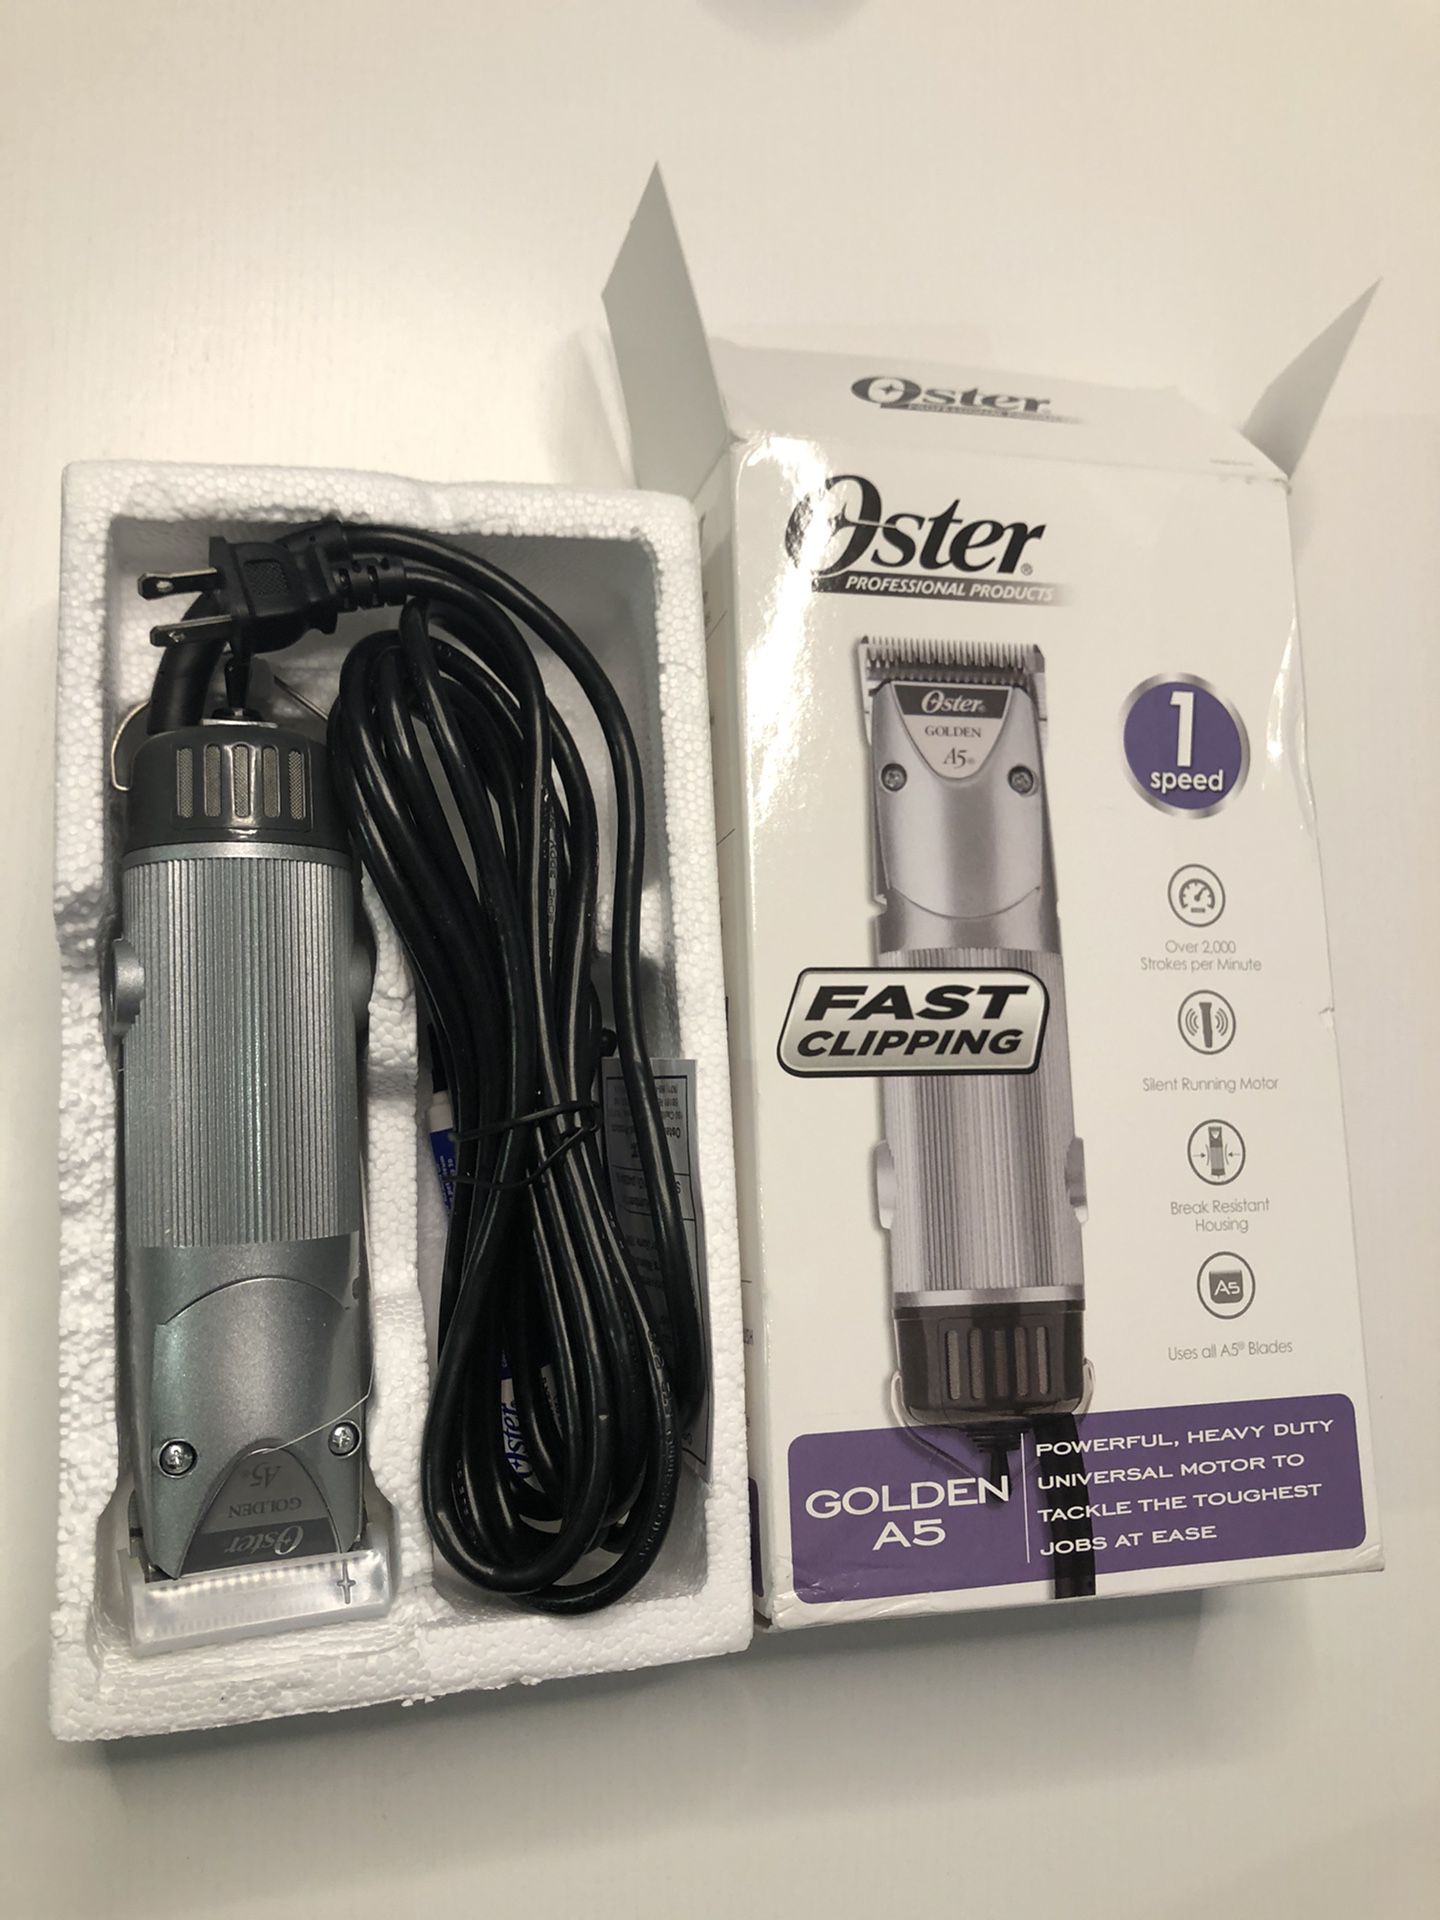 Oster Golden A5 1 Speed Clipper, with #10 Blade | Model #78005-010